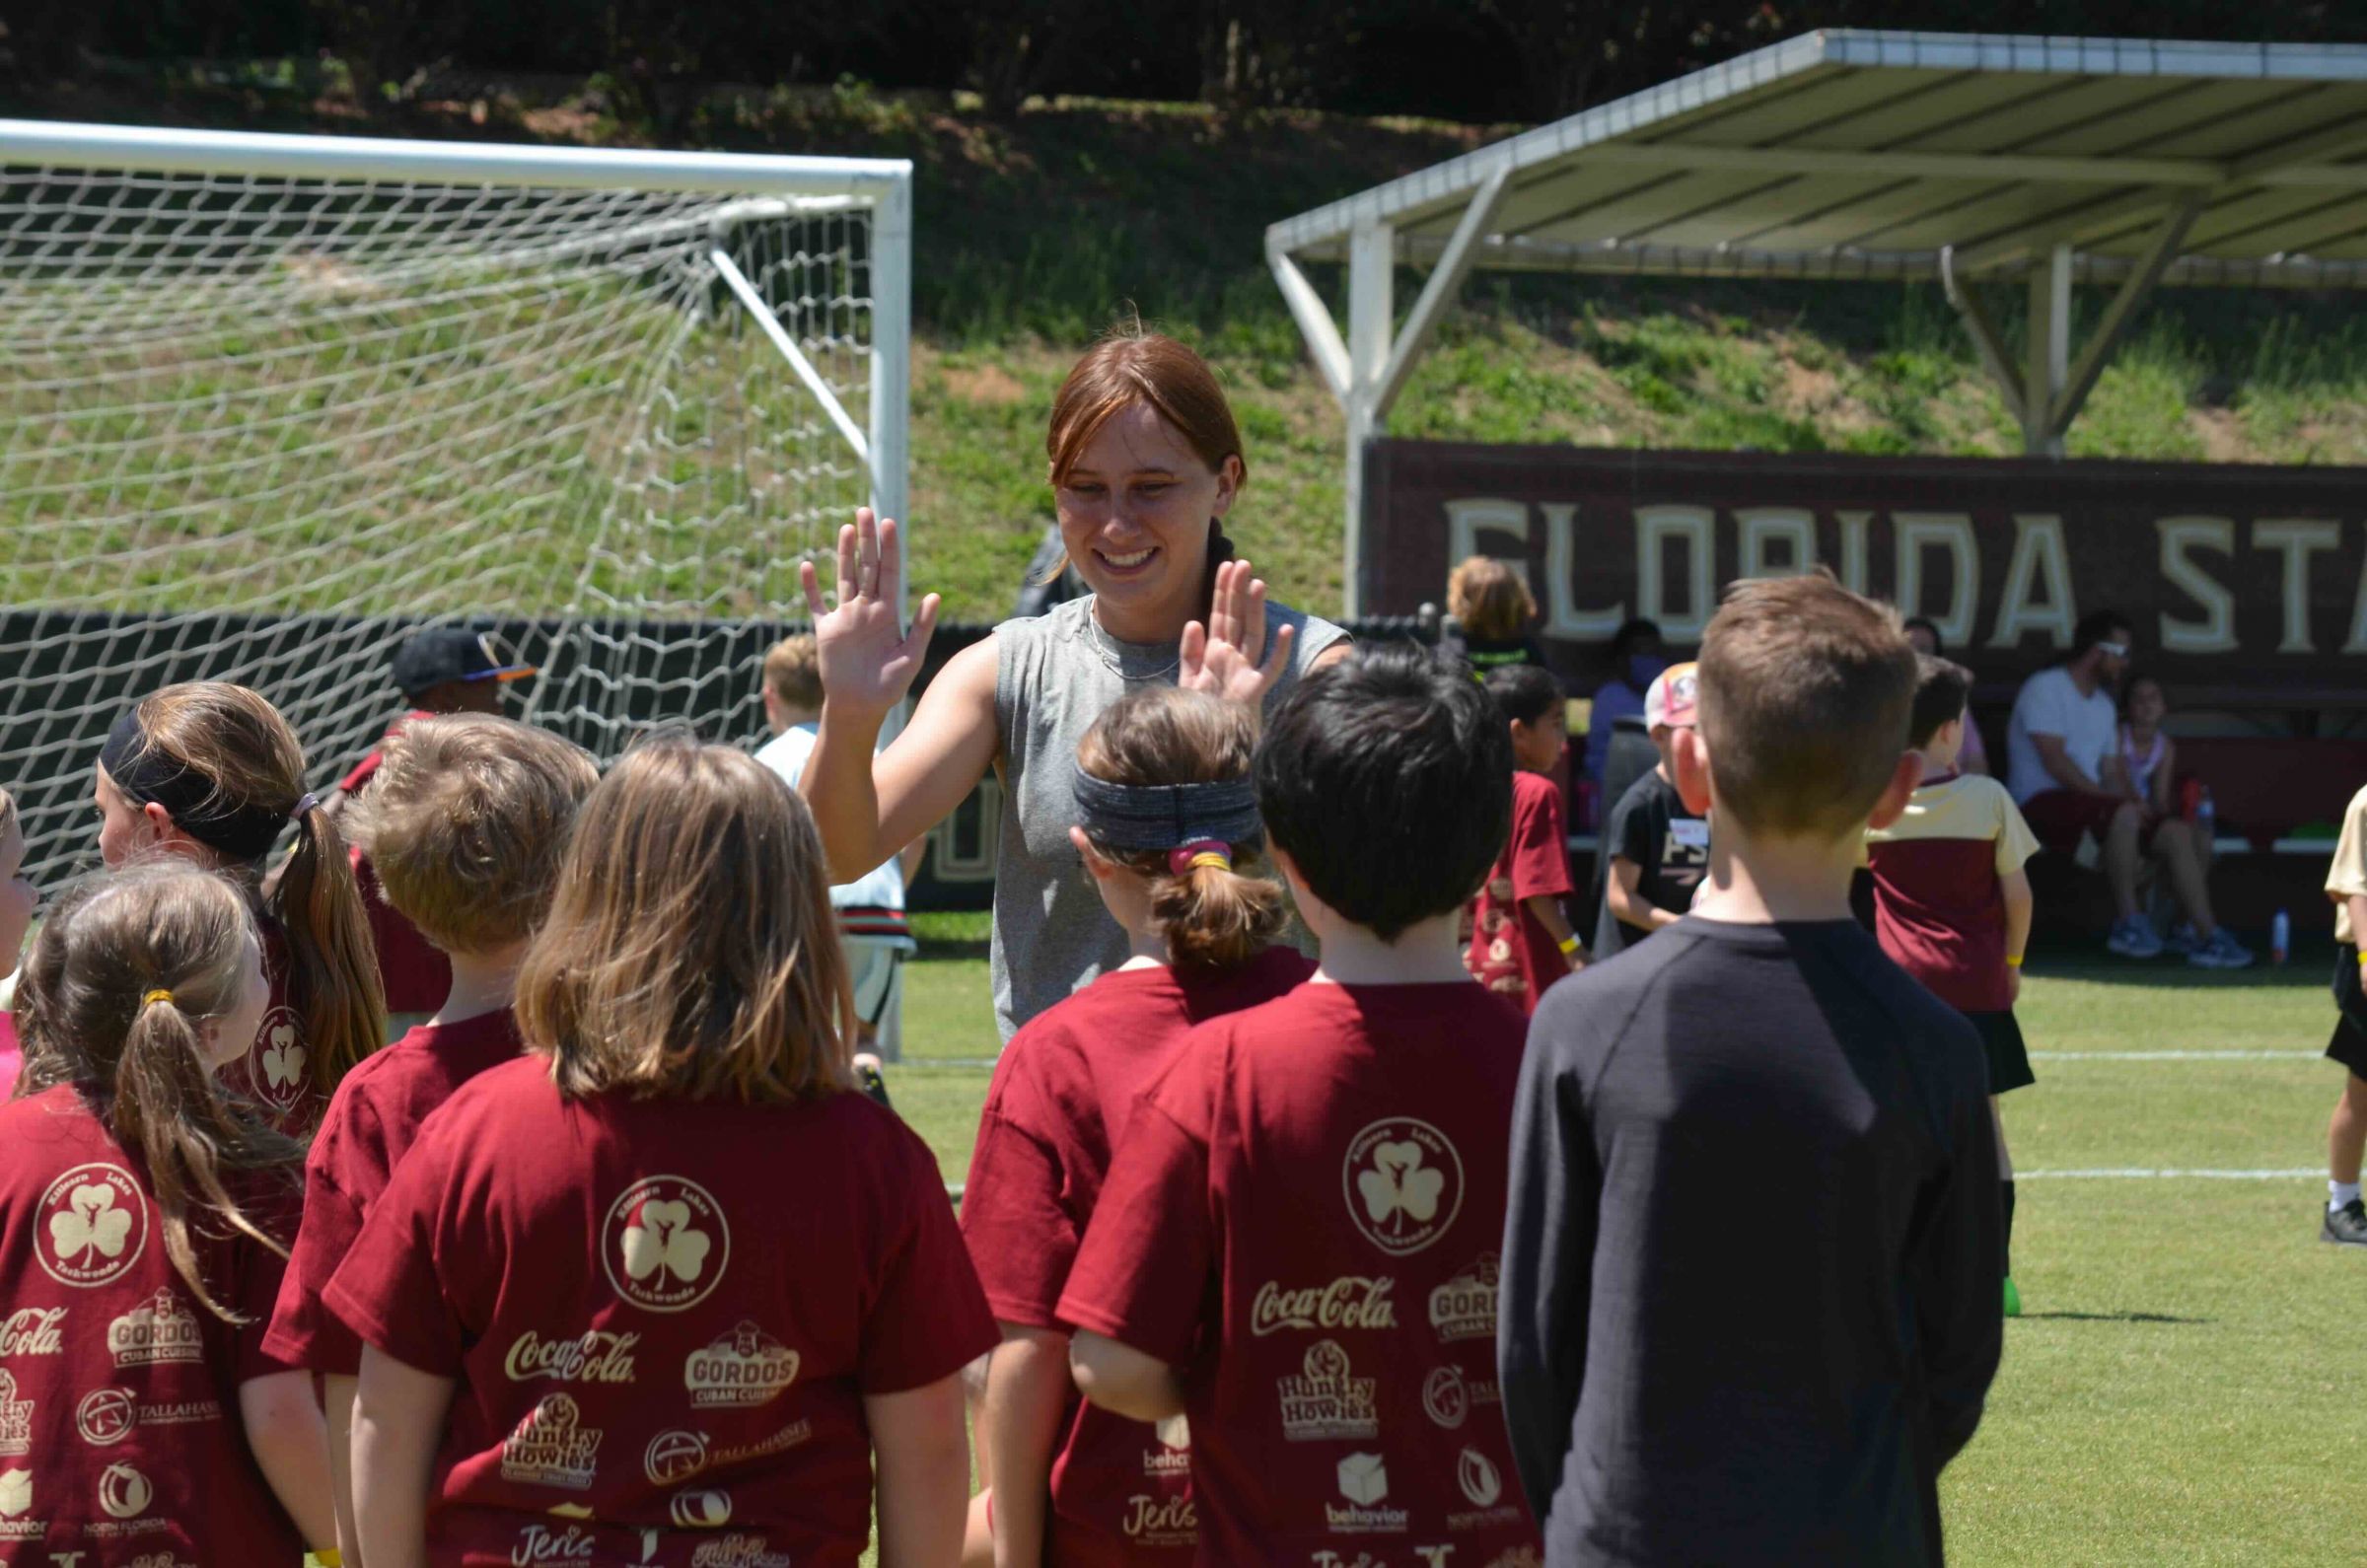 Photo credit: Former FSU soccer player Olivia Garcia leads participants through a cheer during the 2023 Kickin' It For Autism Event. (Cathy Zenko)